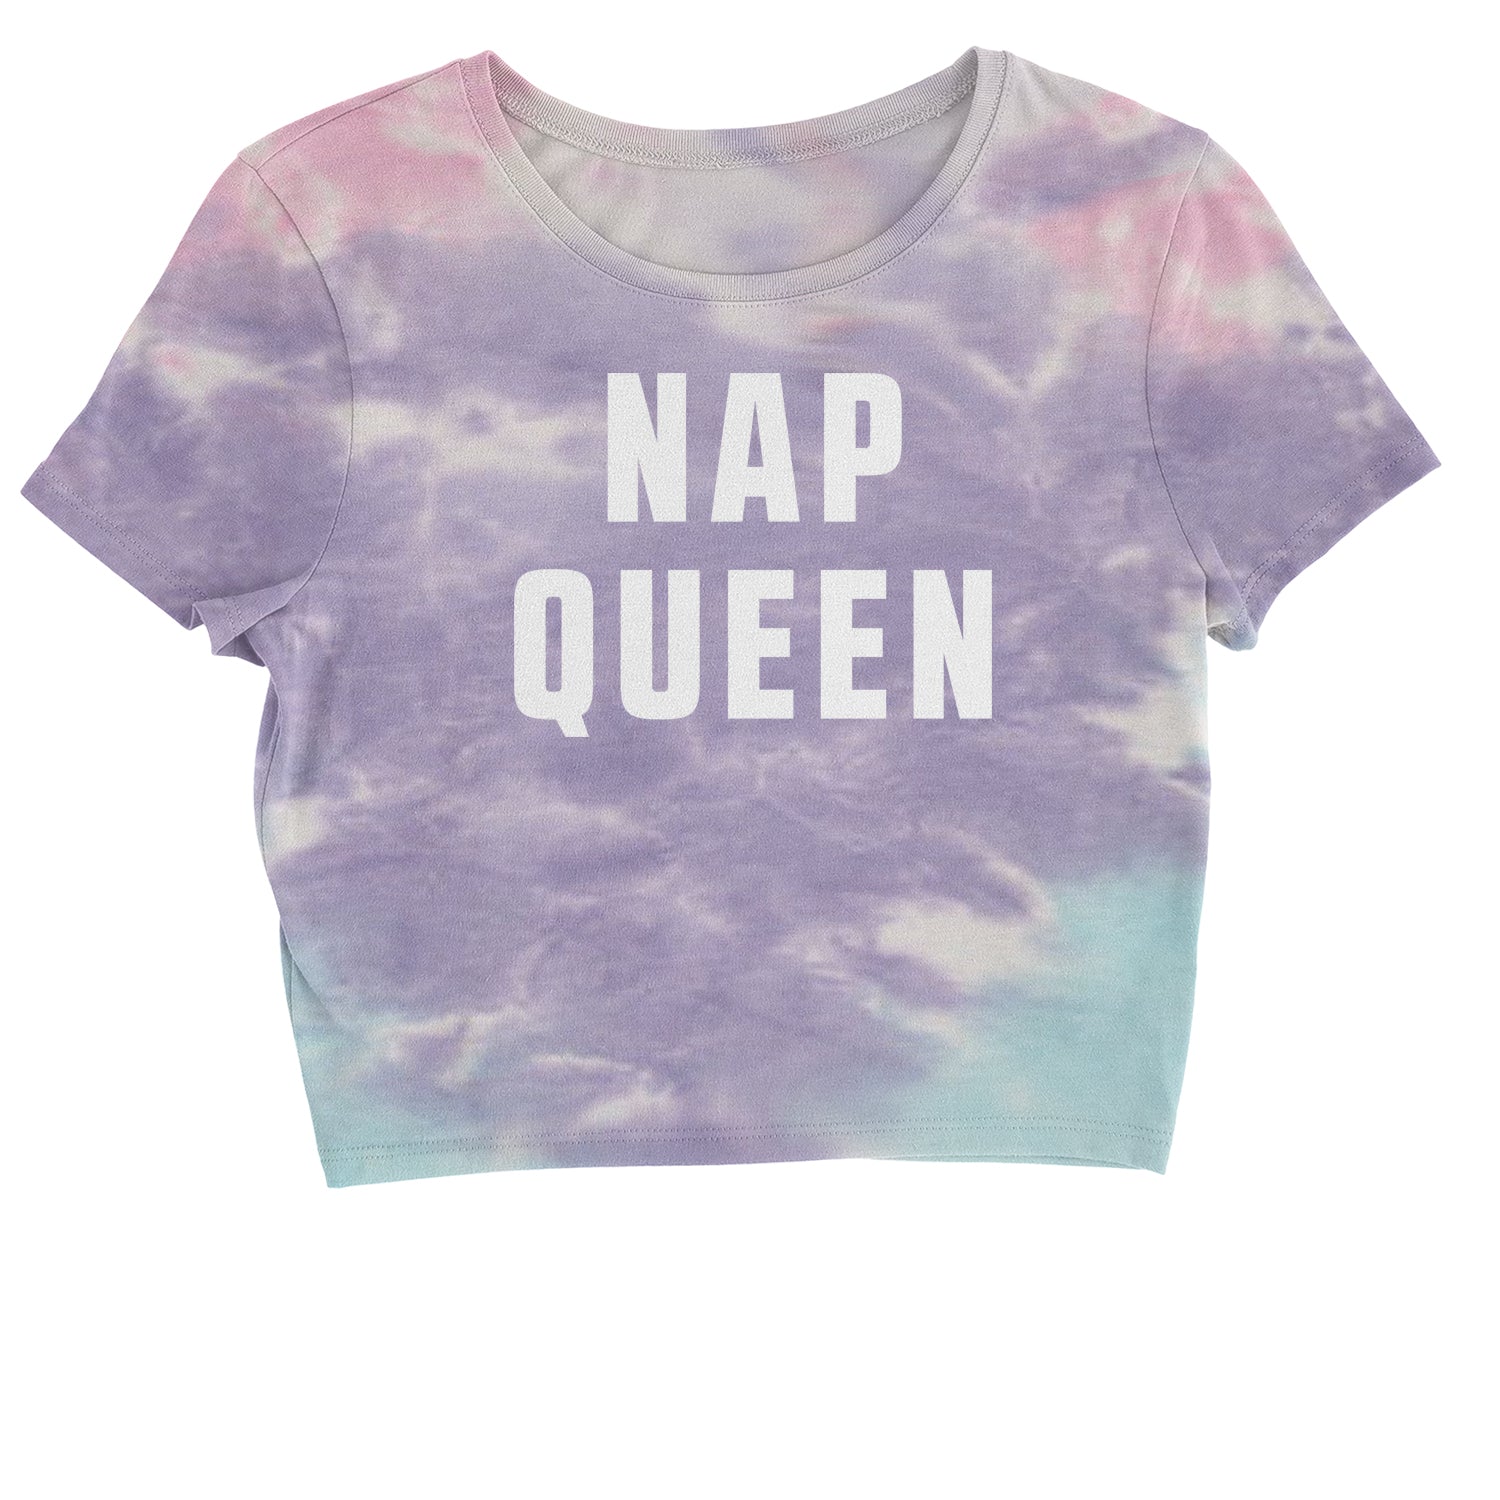 Nap Queen (White Print) Comfy Top For Lazy Days Cropped T-Shirt all, day, function, lazy, nap, pajamas, queen, siesta, sleep, tired, to, too by Expression Tees